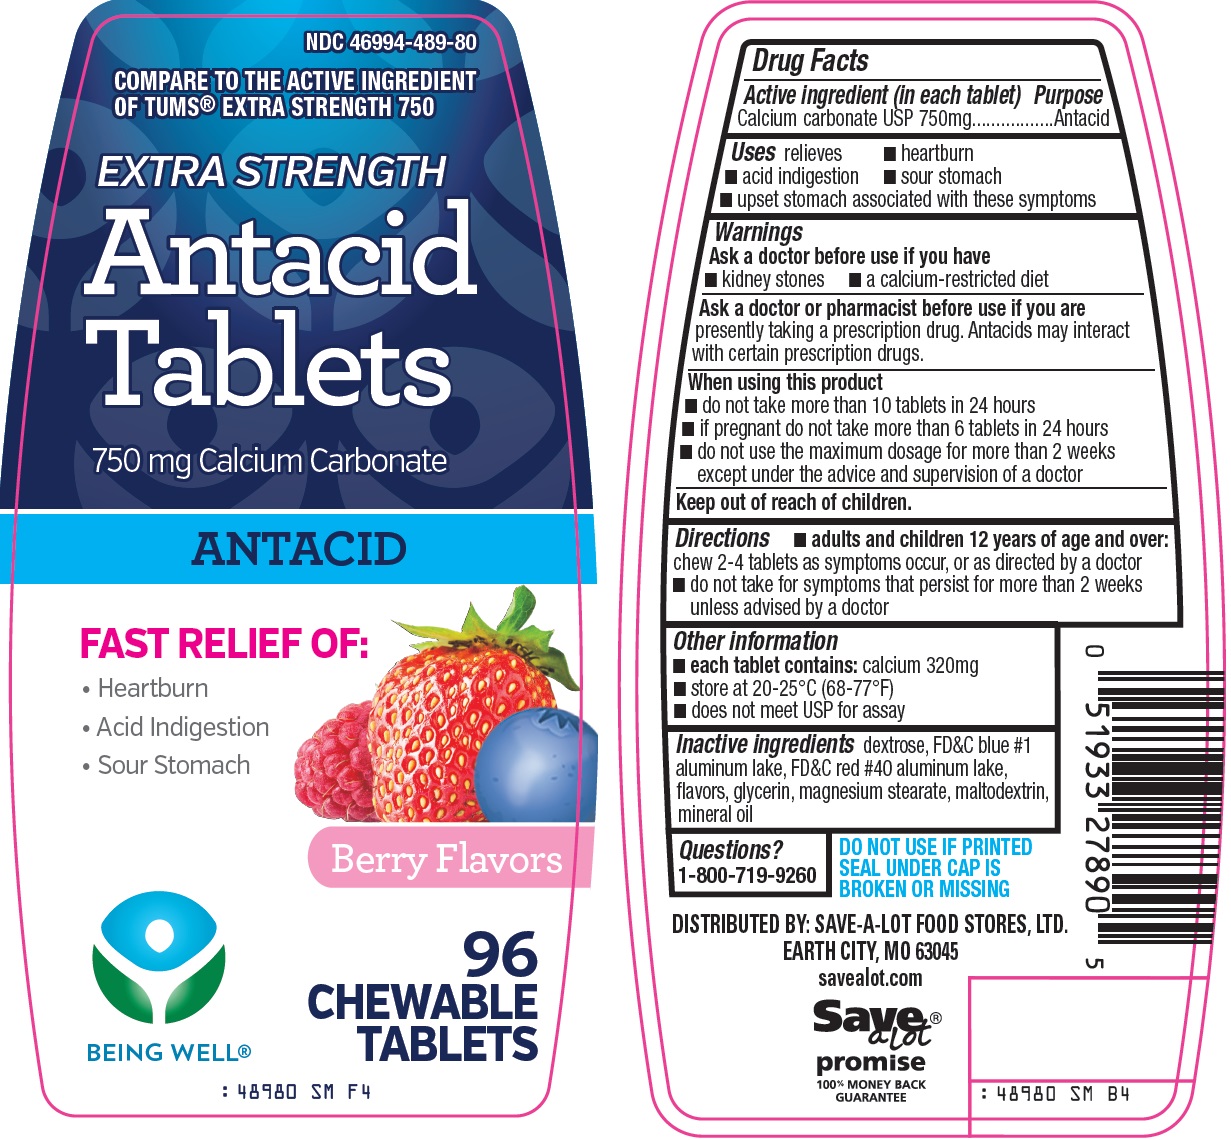 Being Well Antacid Tablets image